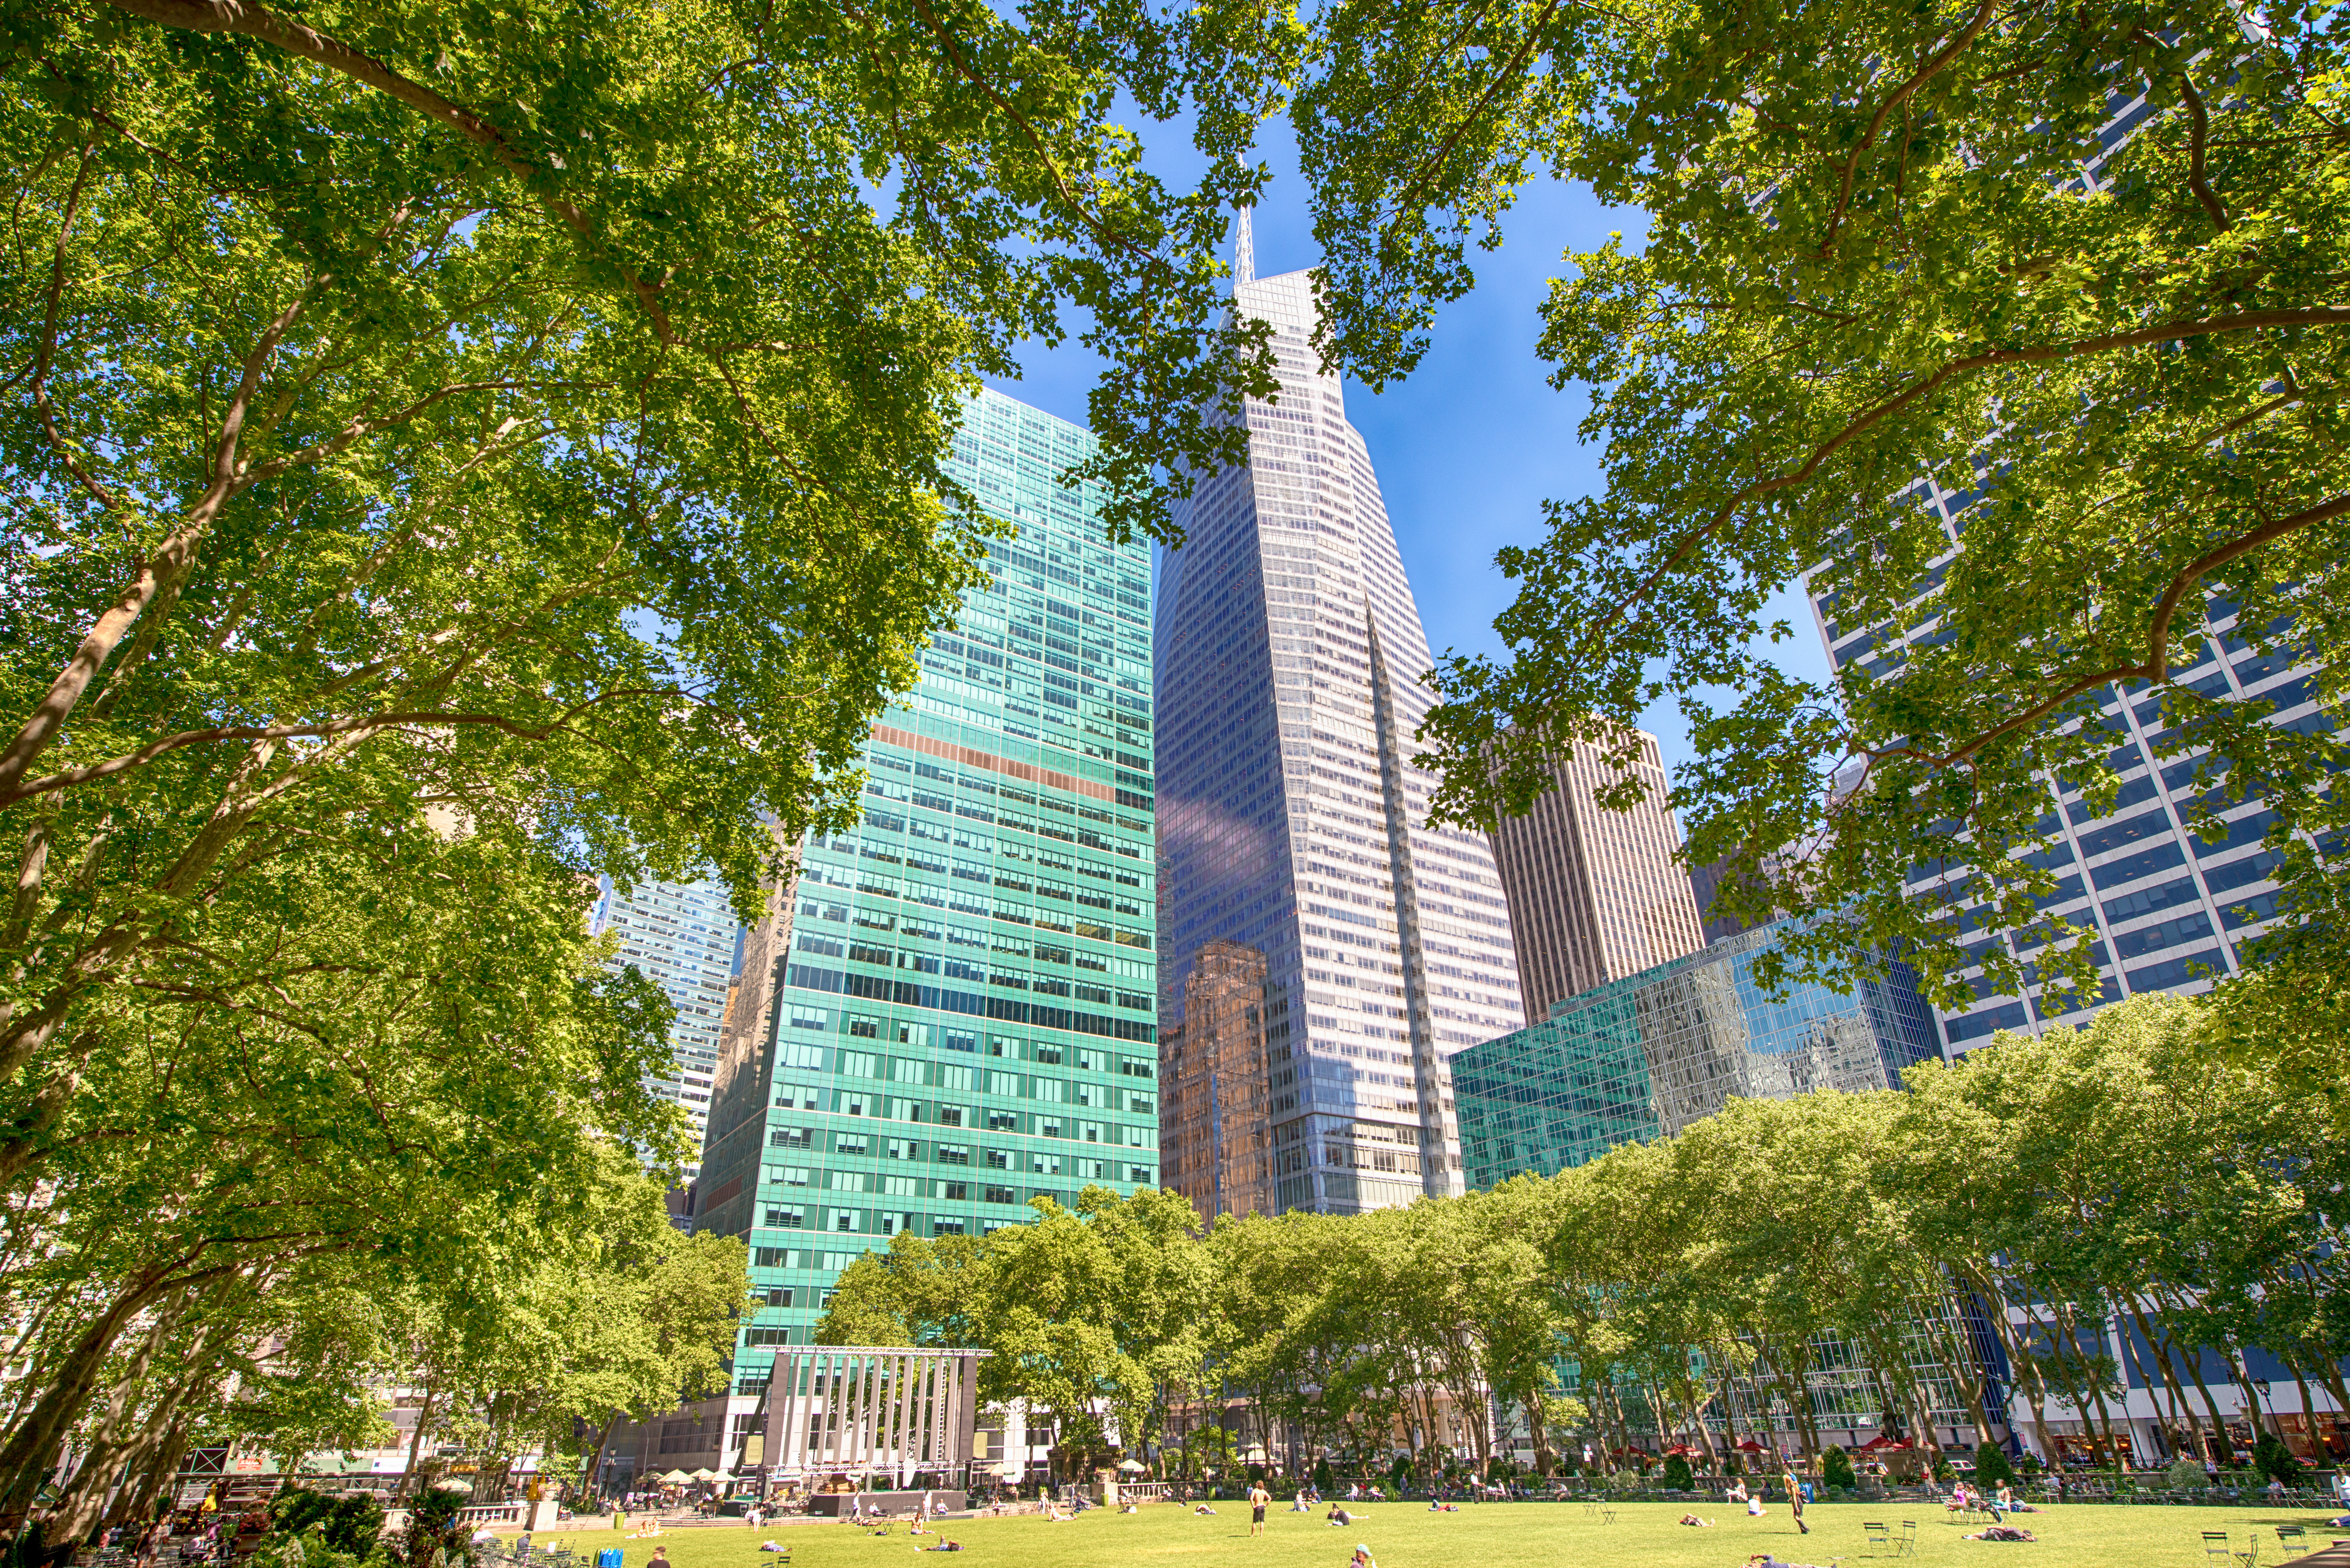 Sunny day in Byrant Park in New York with modern buildings framed by trees